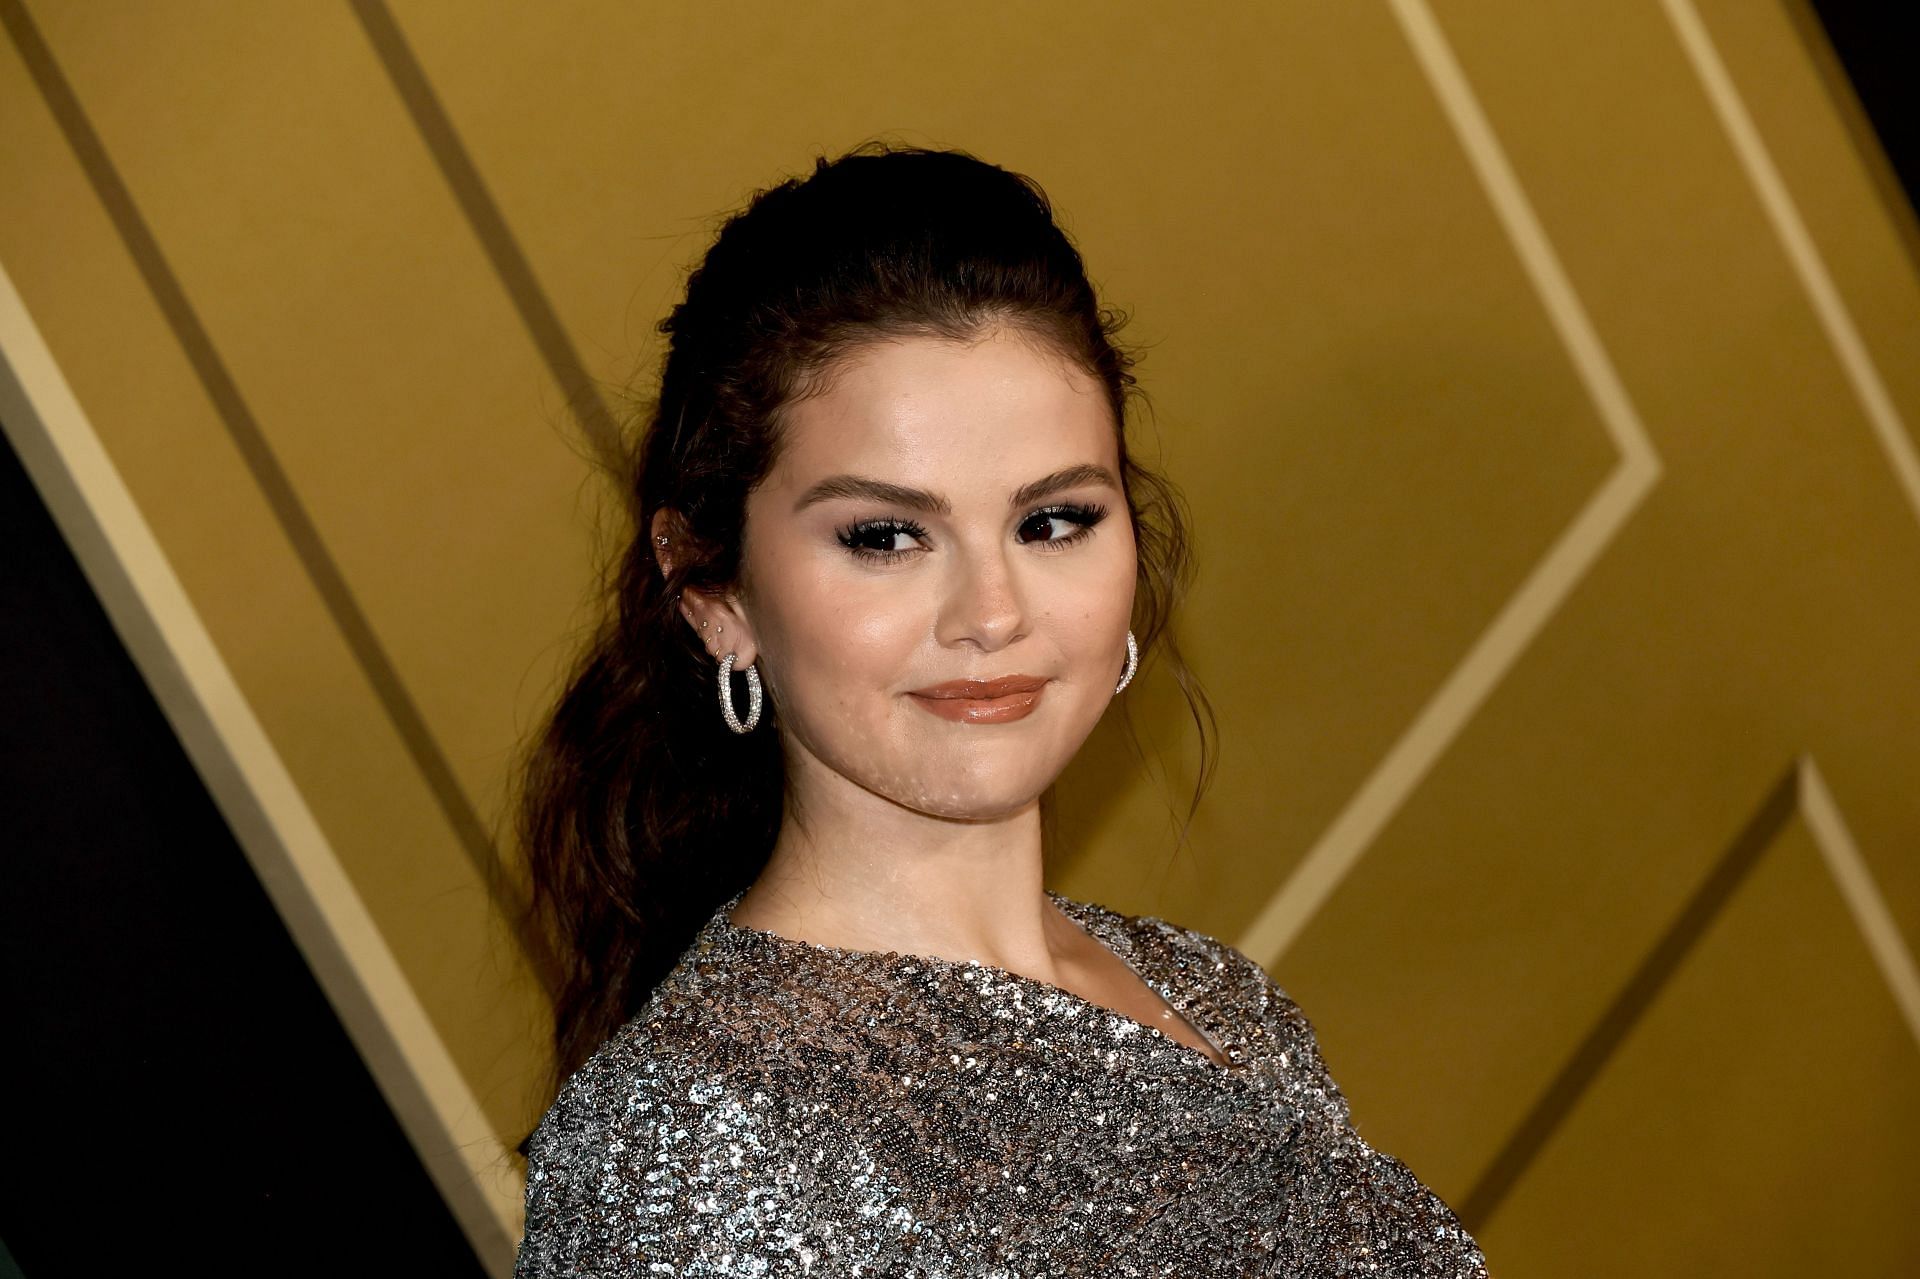 As an artist, Selena has worked on building her capabilities every year. (Photo by Kevin Winter/Getty Images)